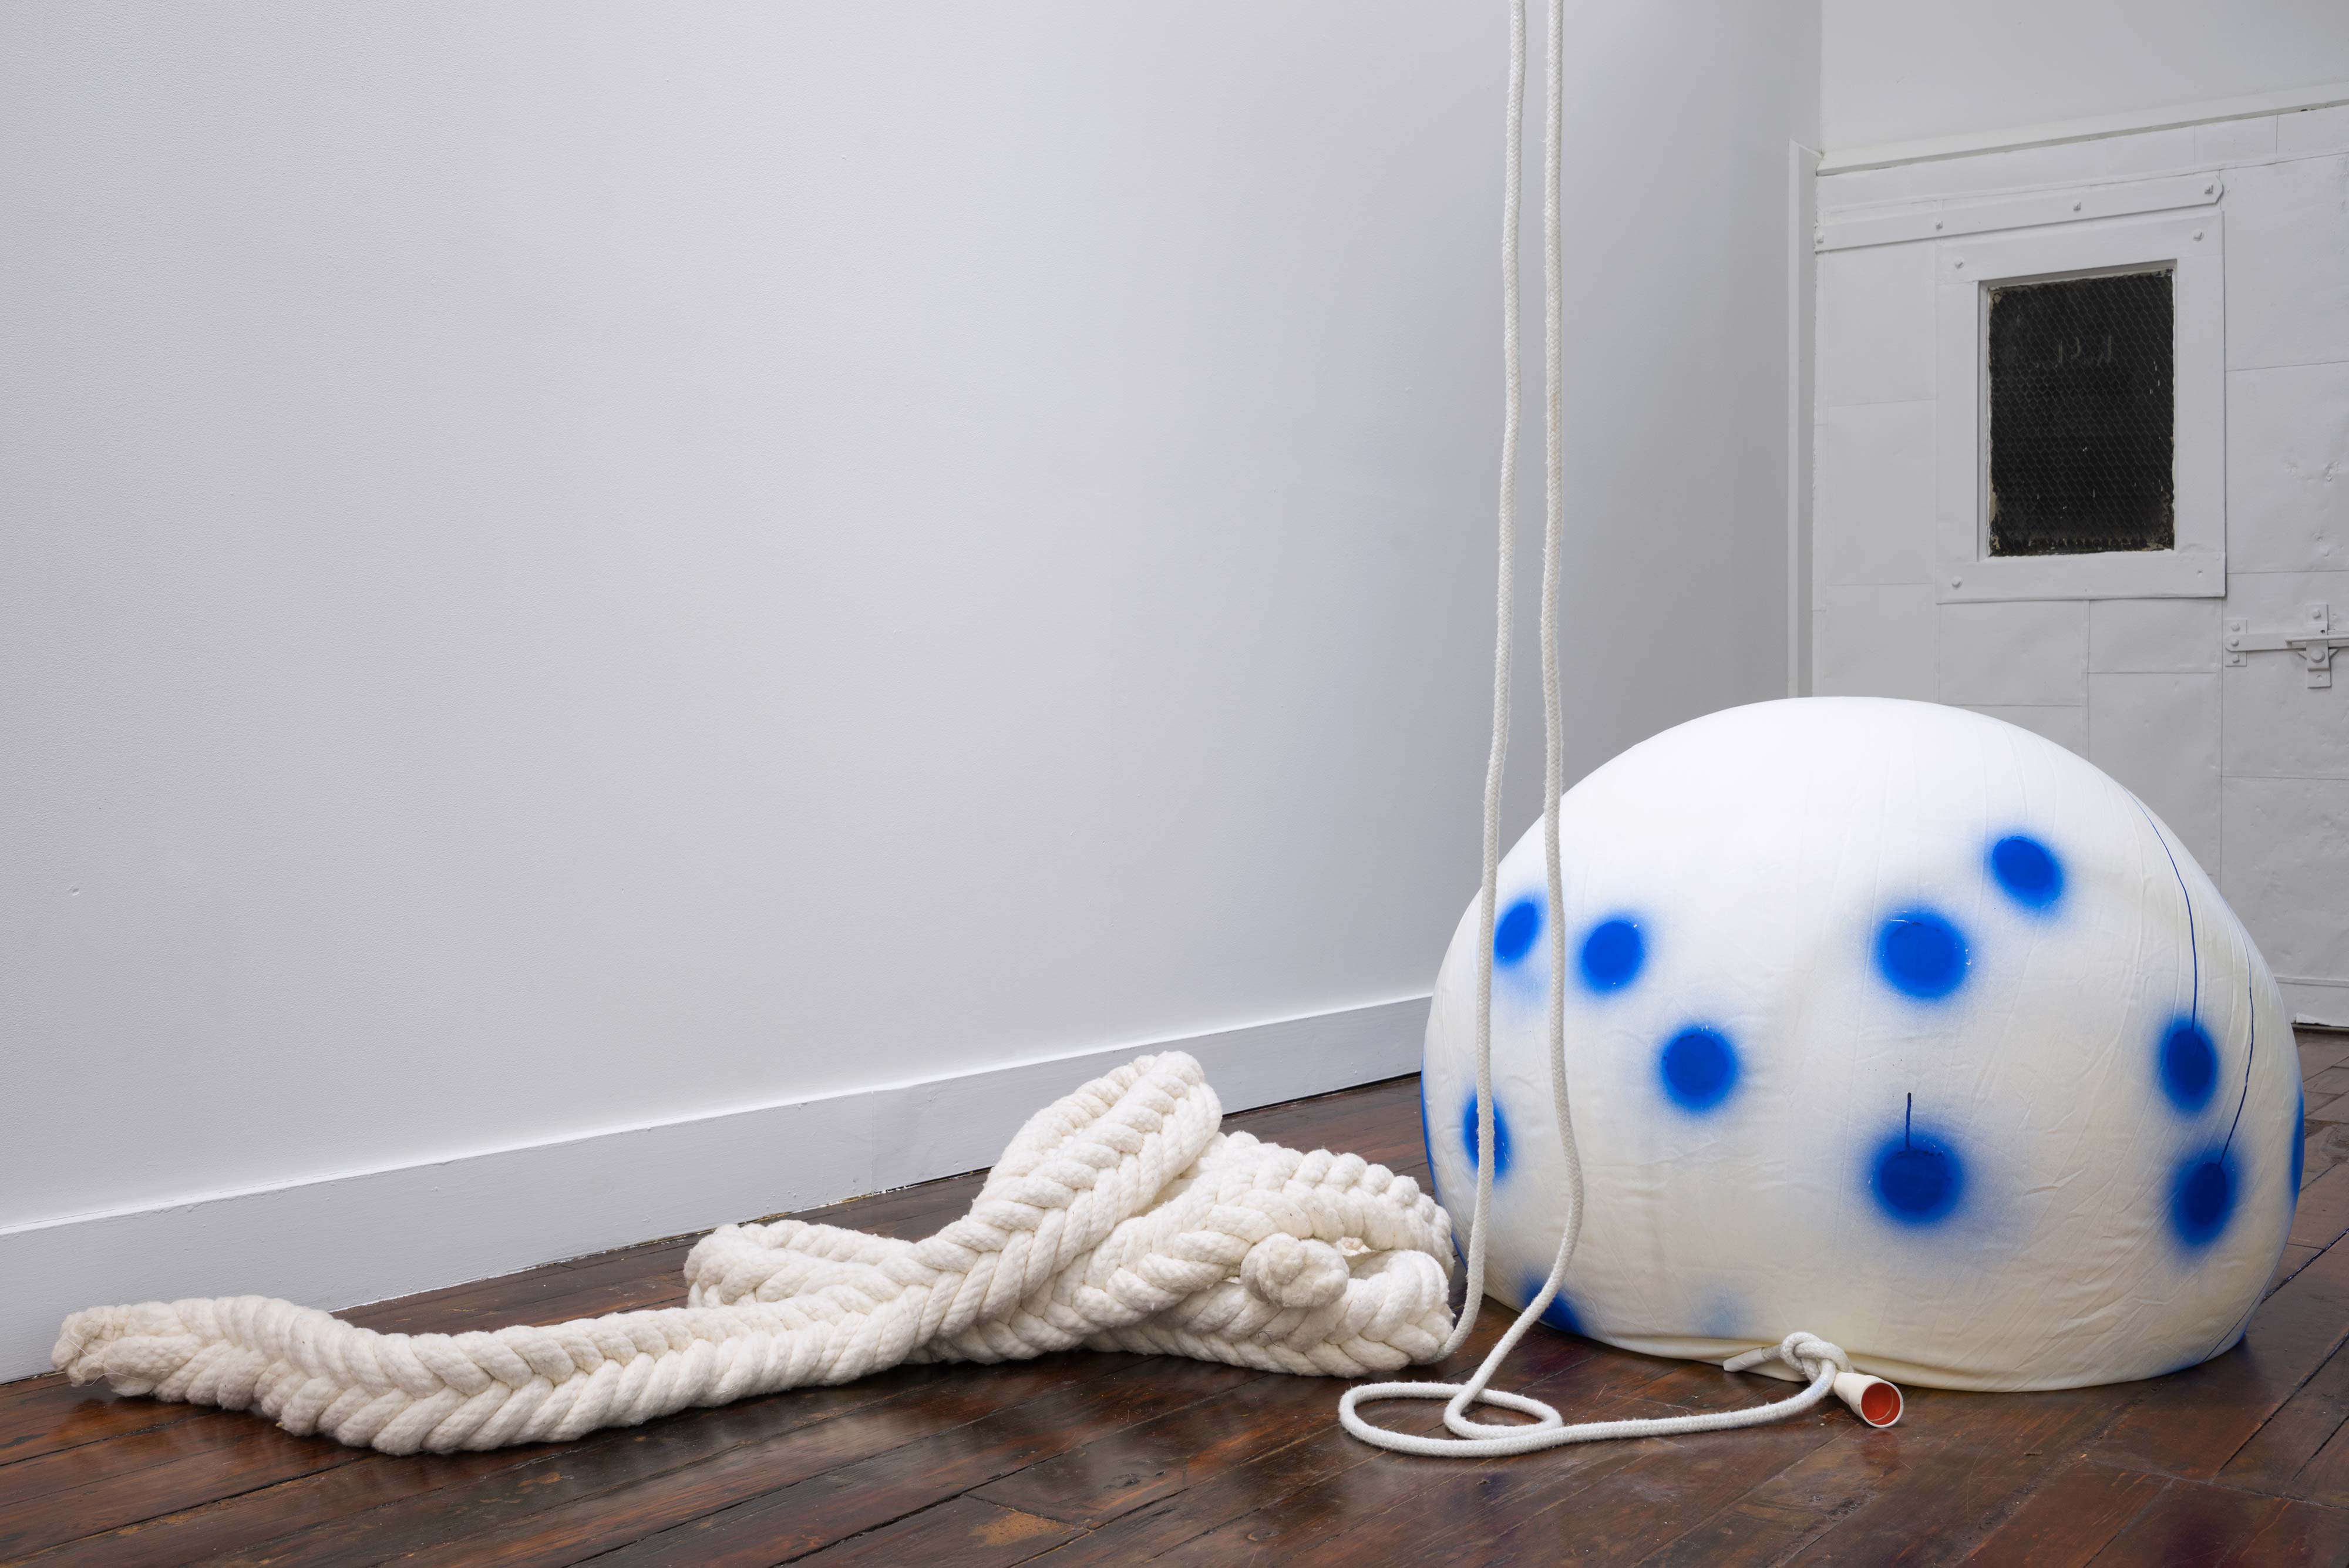 Nancy Davidson<br>Fallen Cloud (I)<br>1997-2016<br>latex, rope, paint, cotton<br>36 x 36 in (91 x 91 cm), height variable